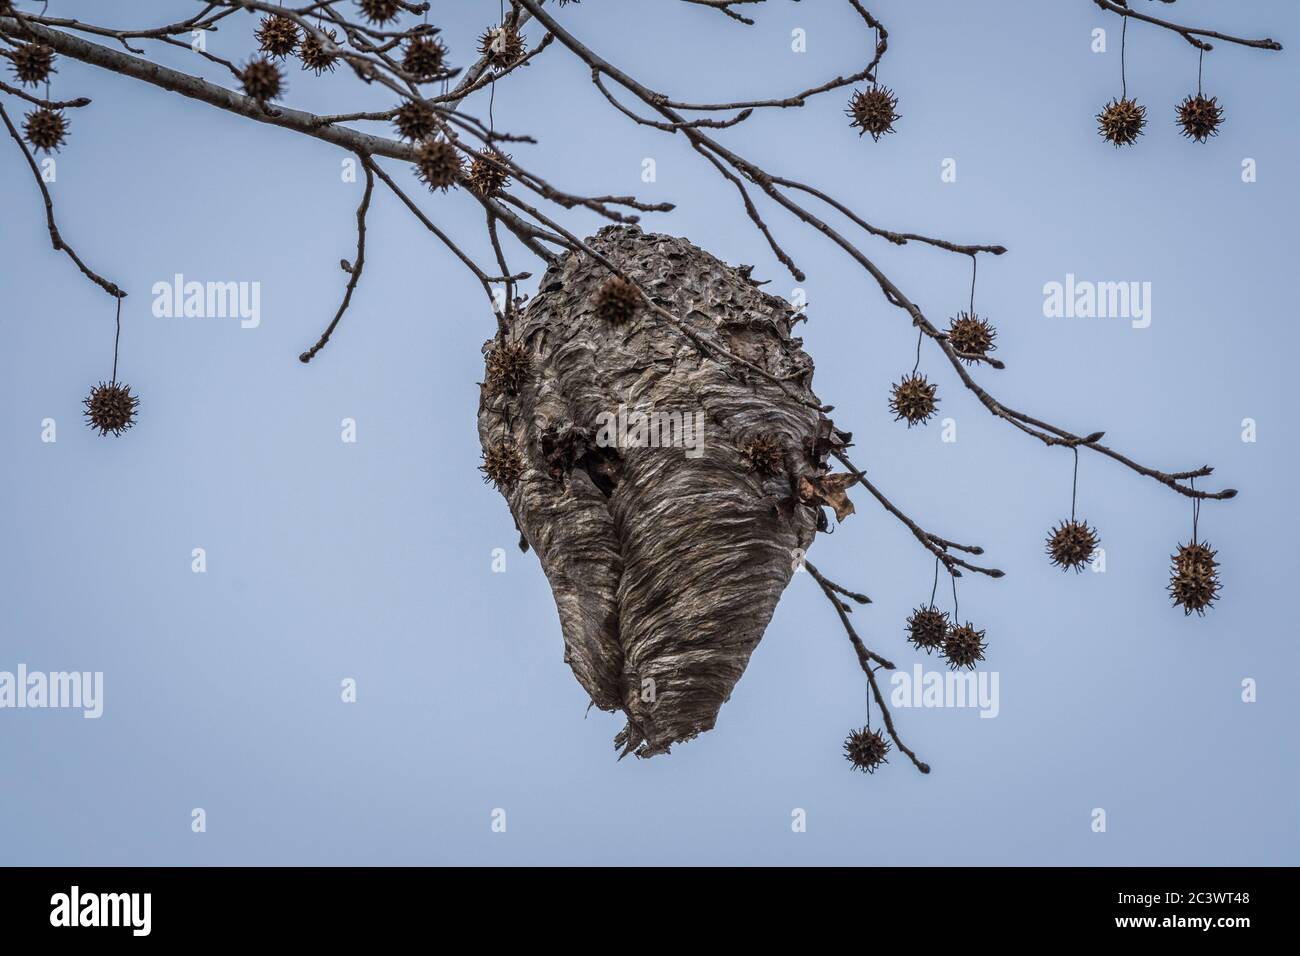 A giant beehive hanging from a tree branch way up high with gum tree seed  balls hanging on the limbs surrounding the hive Stock Photo - Alamy